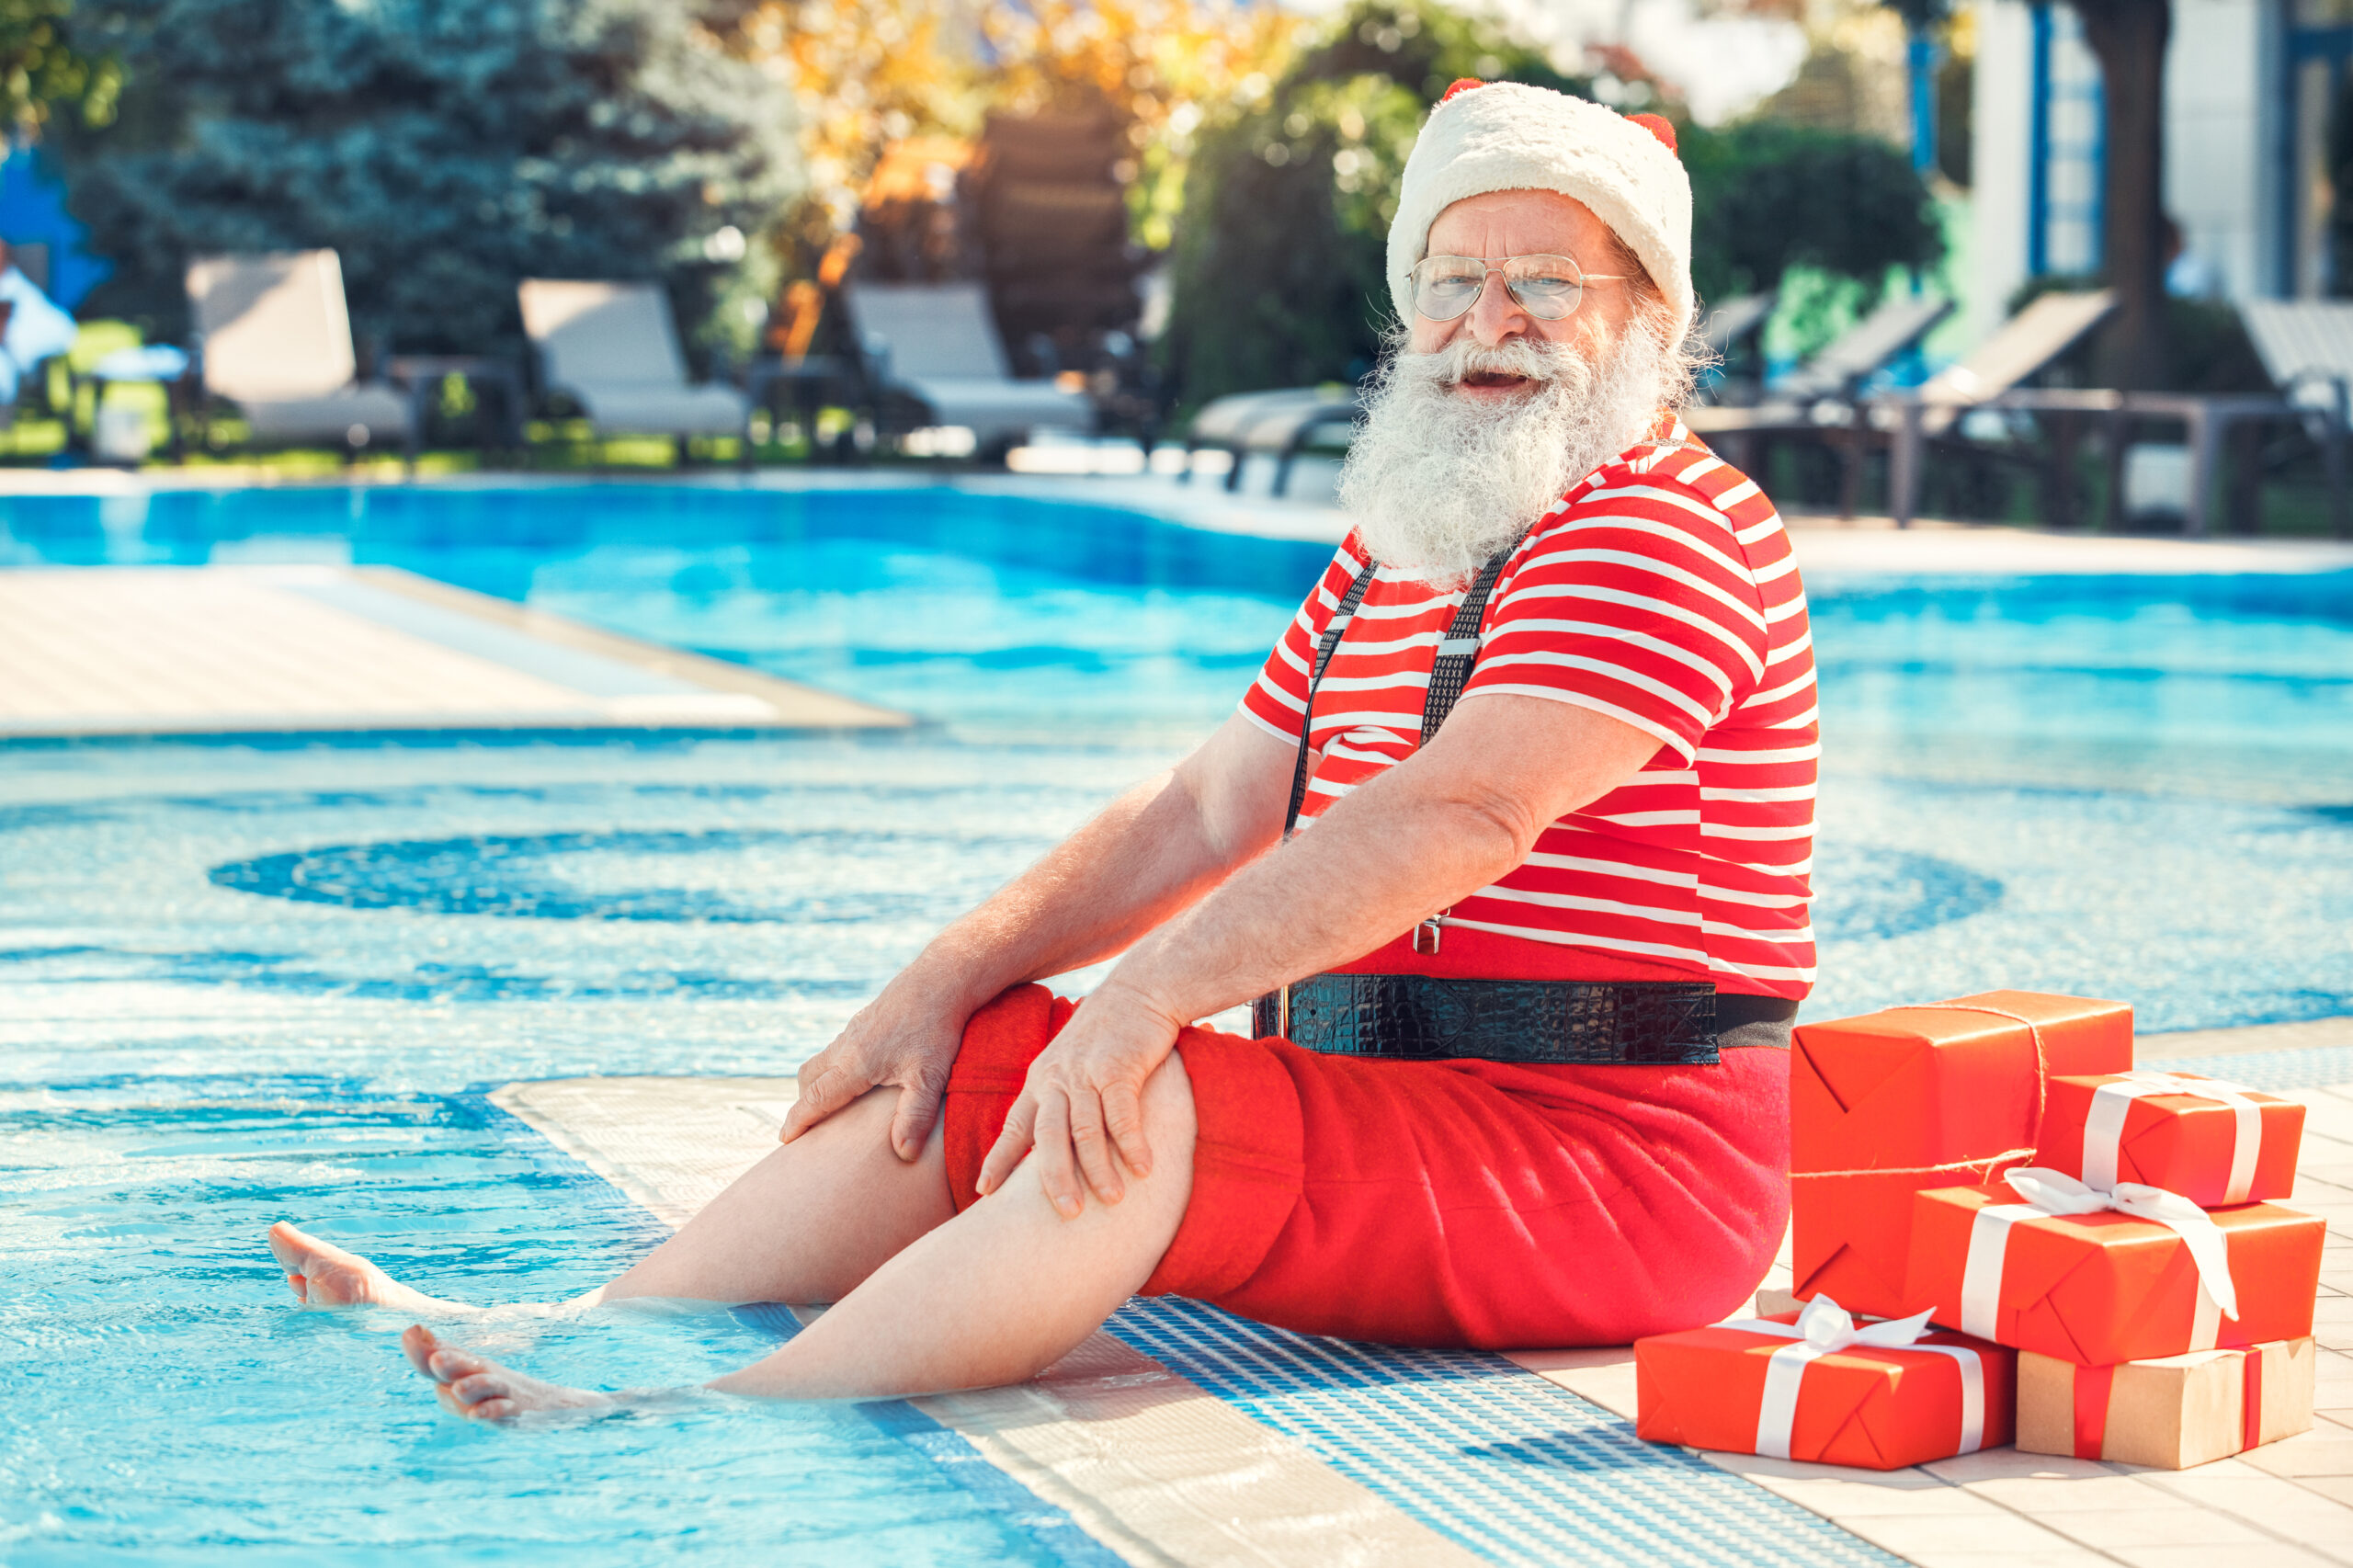 A man in a Santa outfit is sitting on the edge of a pool with his feet in the water. There are red presents next to him.